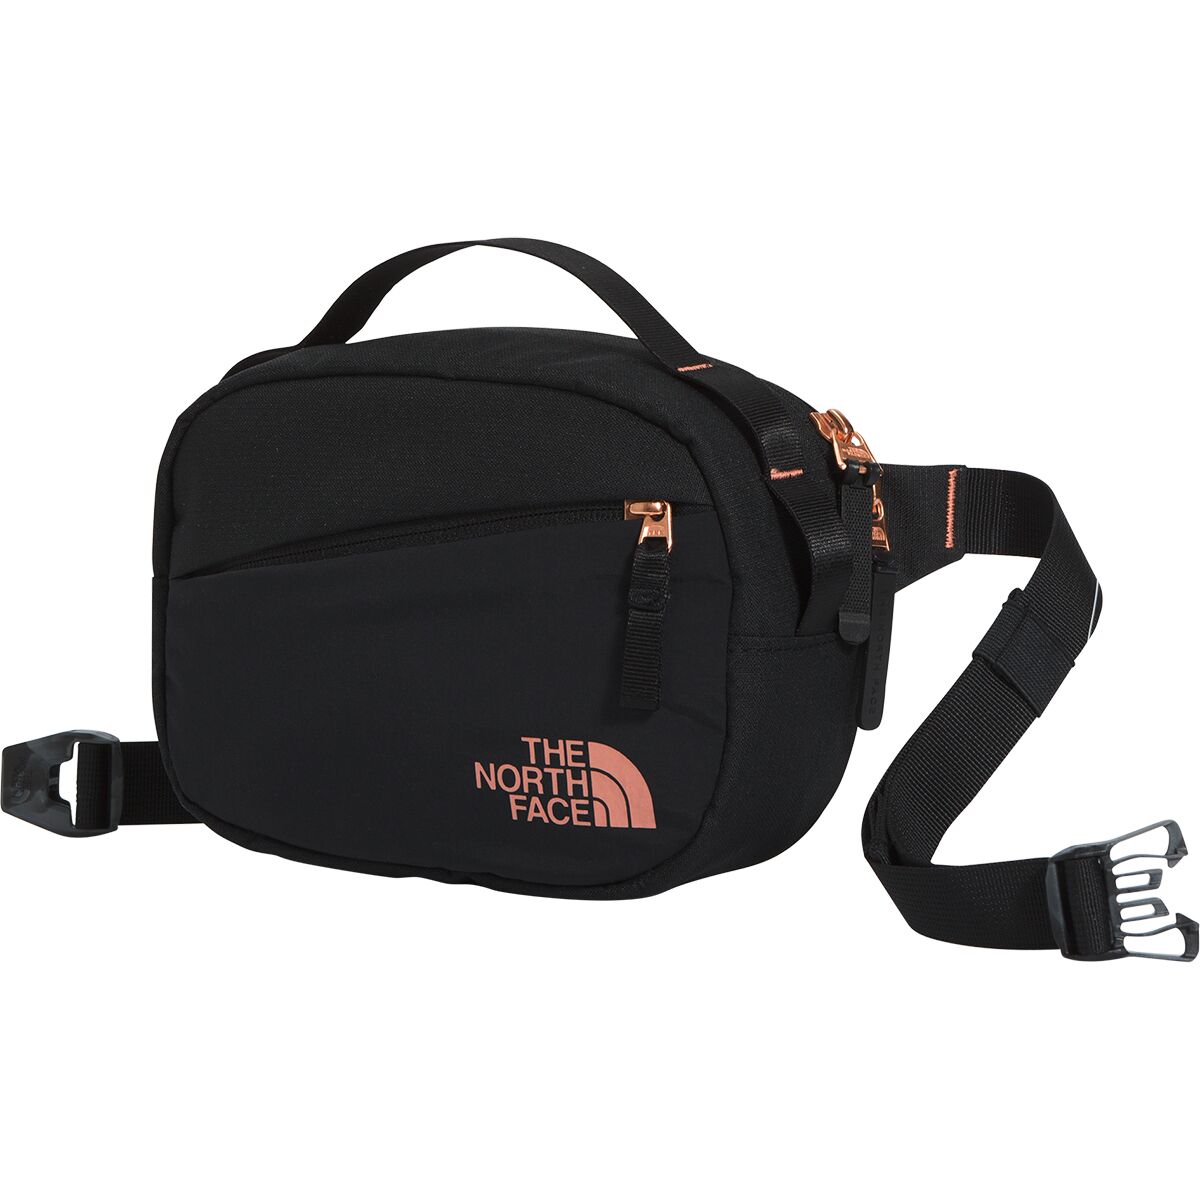 The North Face Isabella Hip Pack - Women's